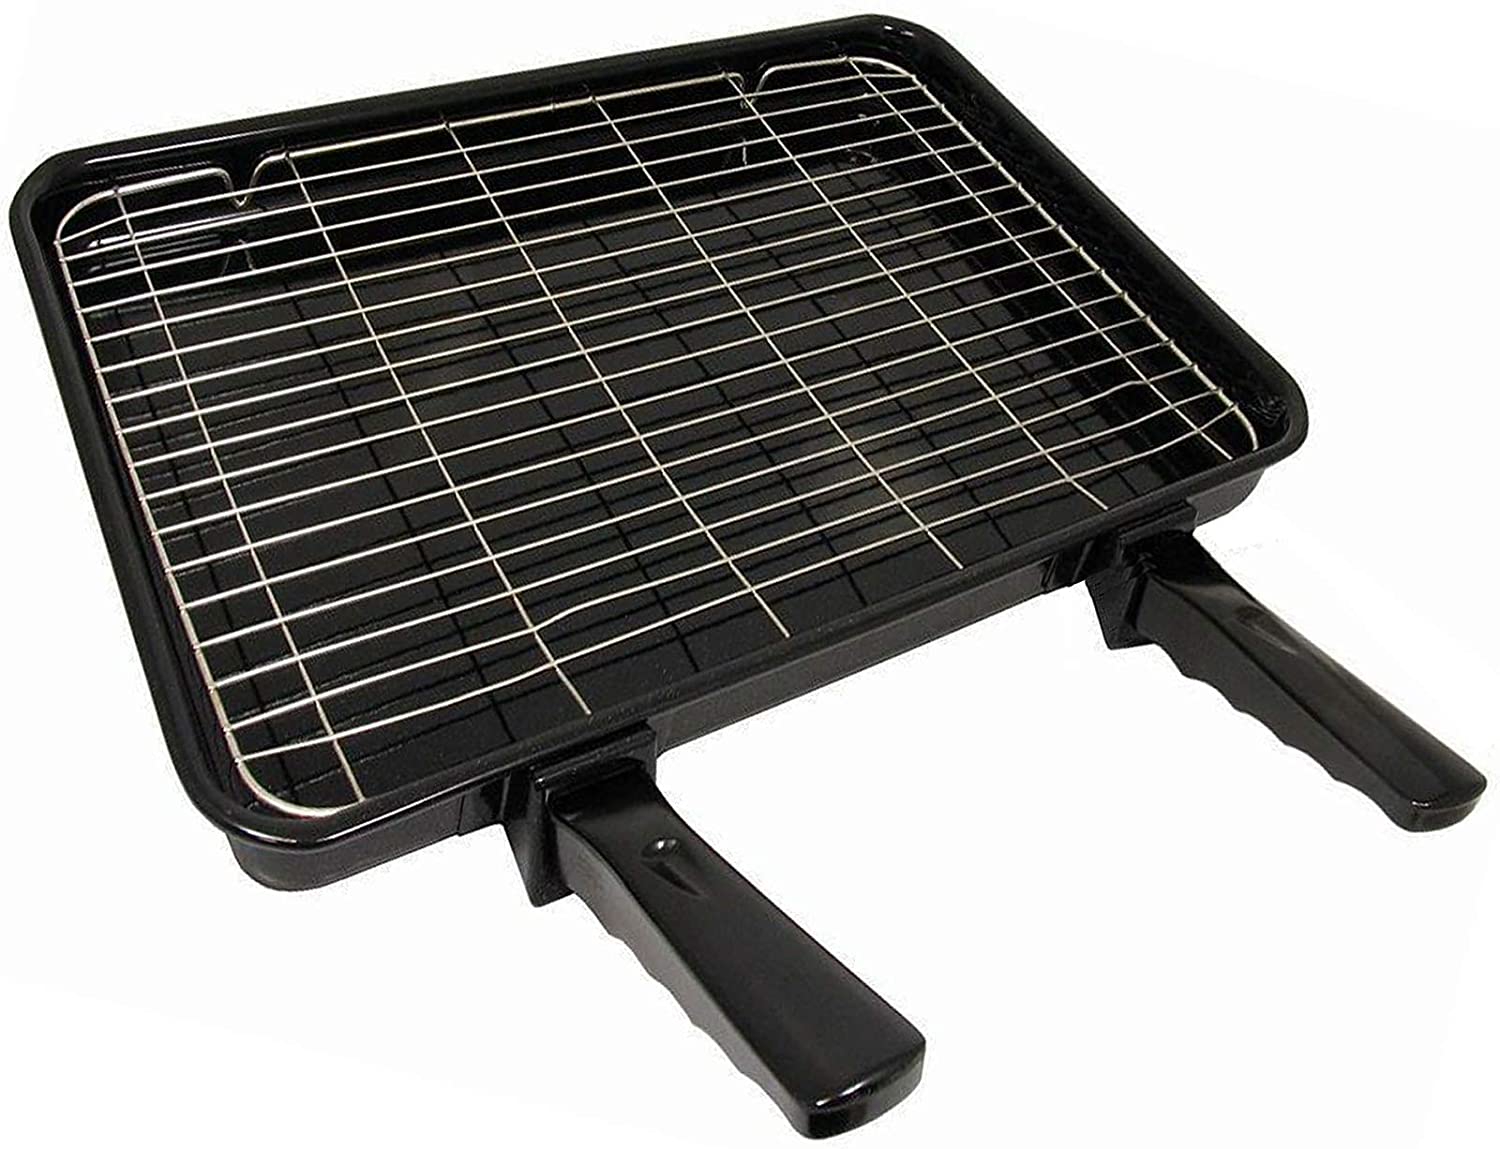 Medium Grill Pan, Rack & Dual Detachable Handles with Adjustable Shelf for ELECTROLUX Oven Cookers